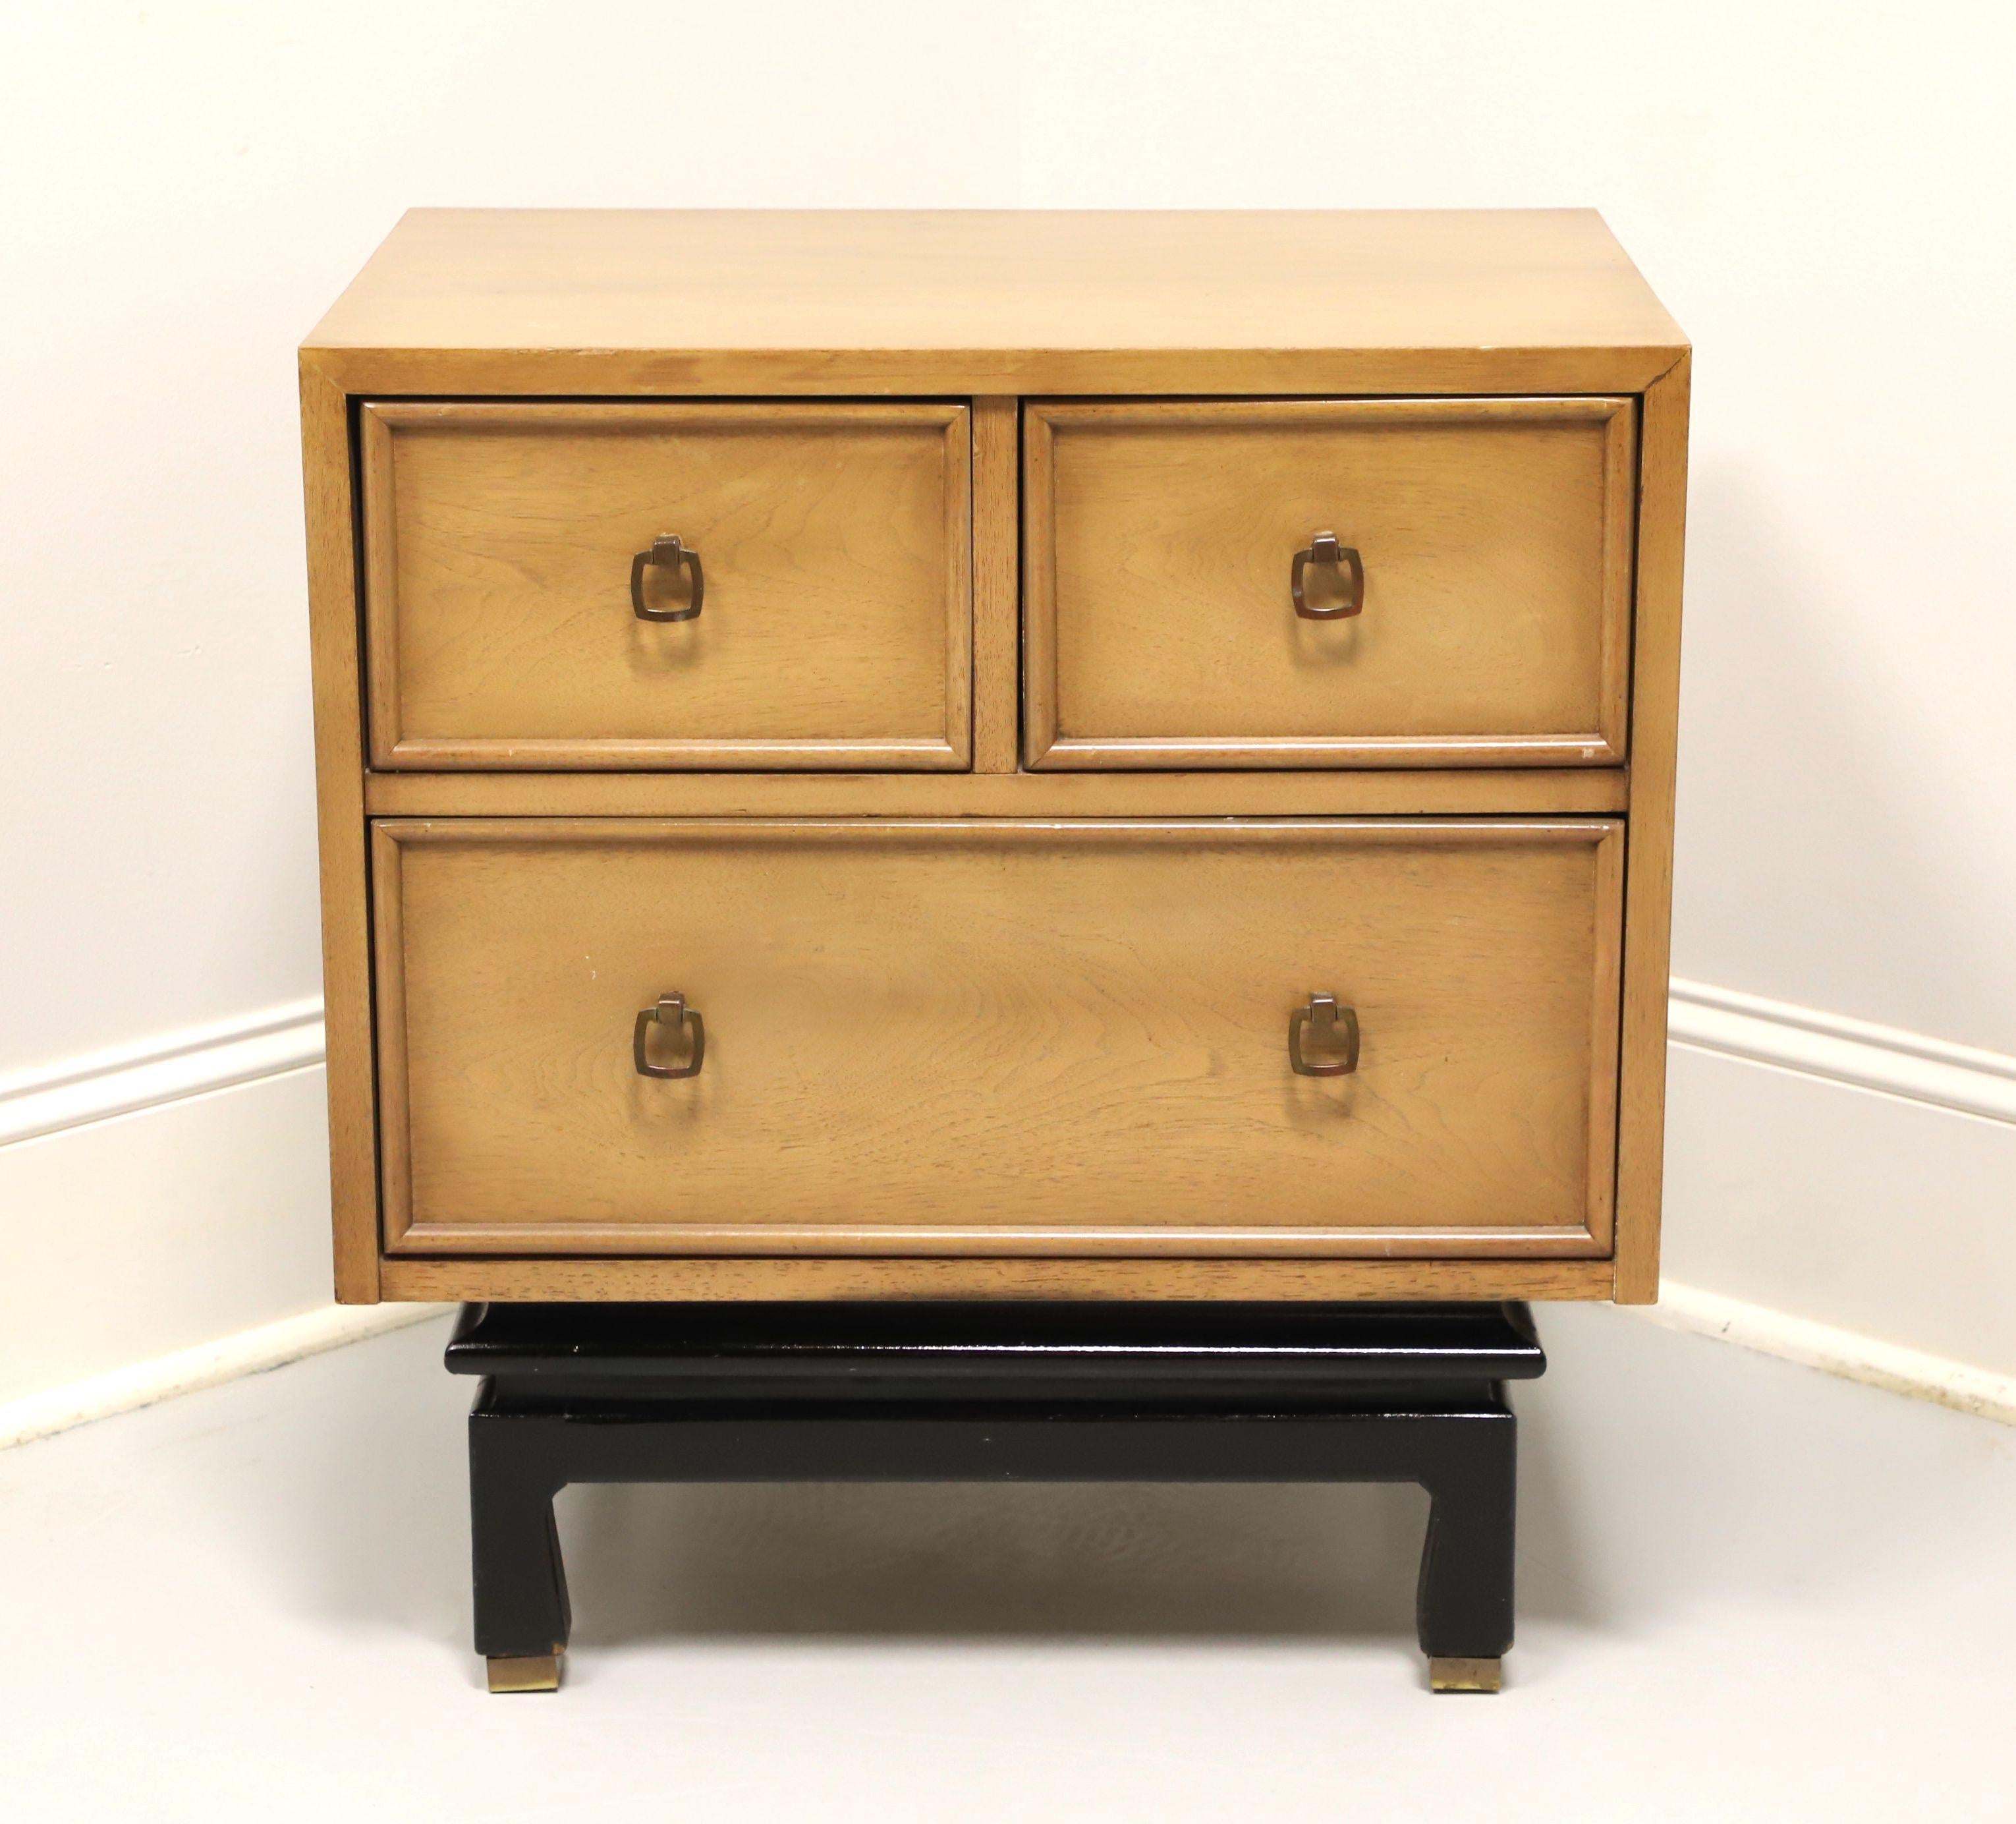 An Asian inspired three-drawer nightstand by American of Martinsville. Walnut with a light blonde finish, smooth top, brass hardware, black painted slightly raised base on four legs with base caps. Features two smaller drawers over one larger